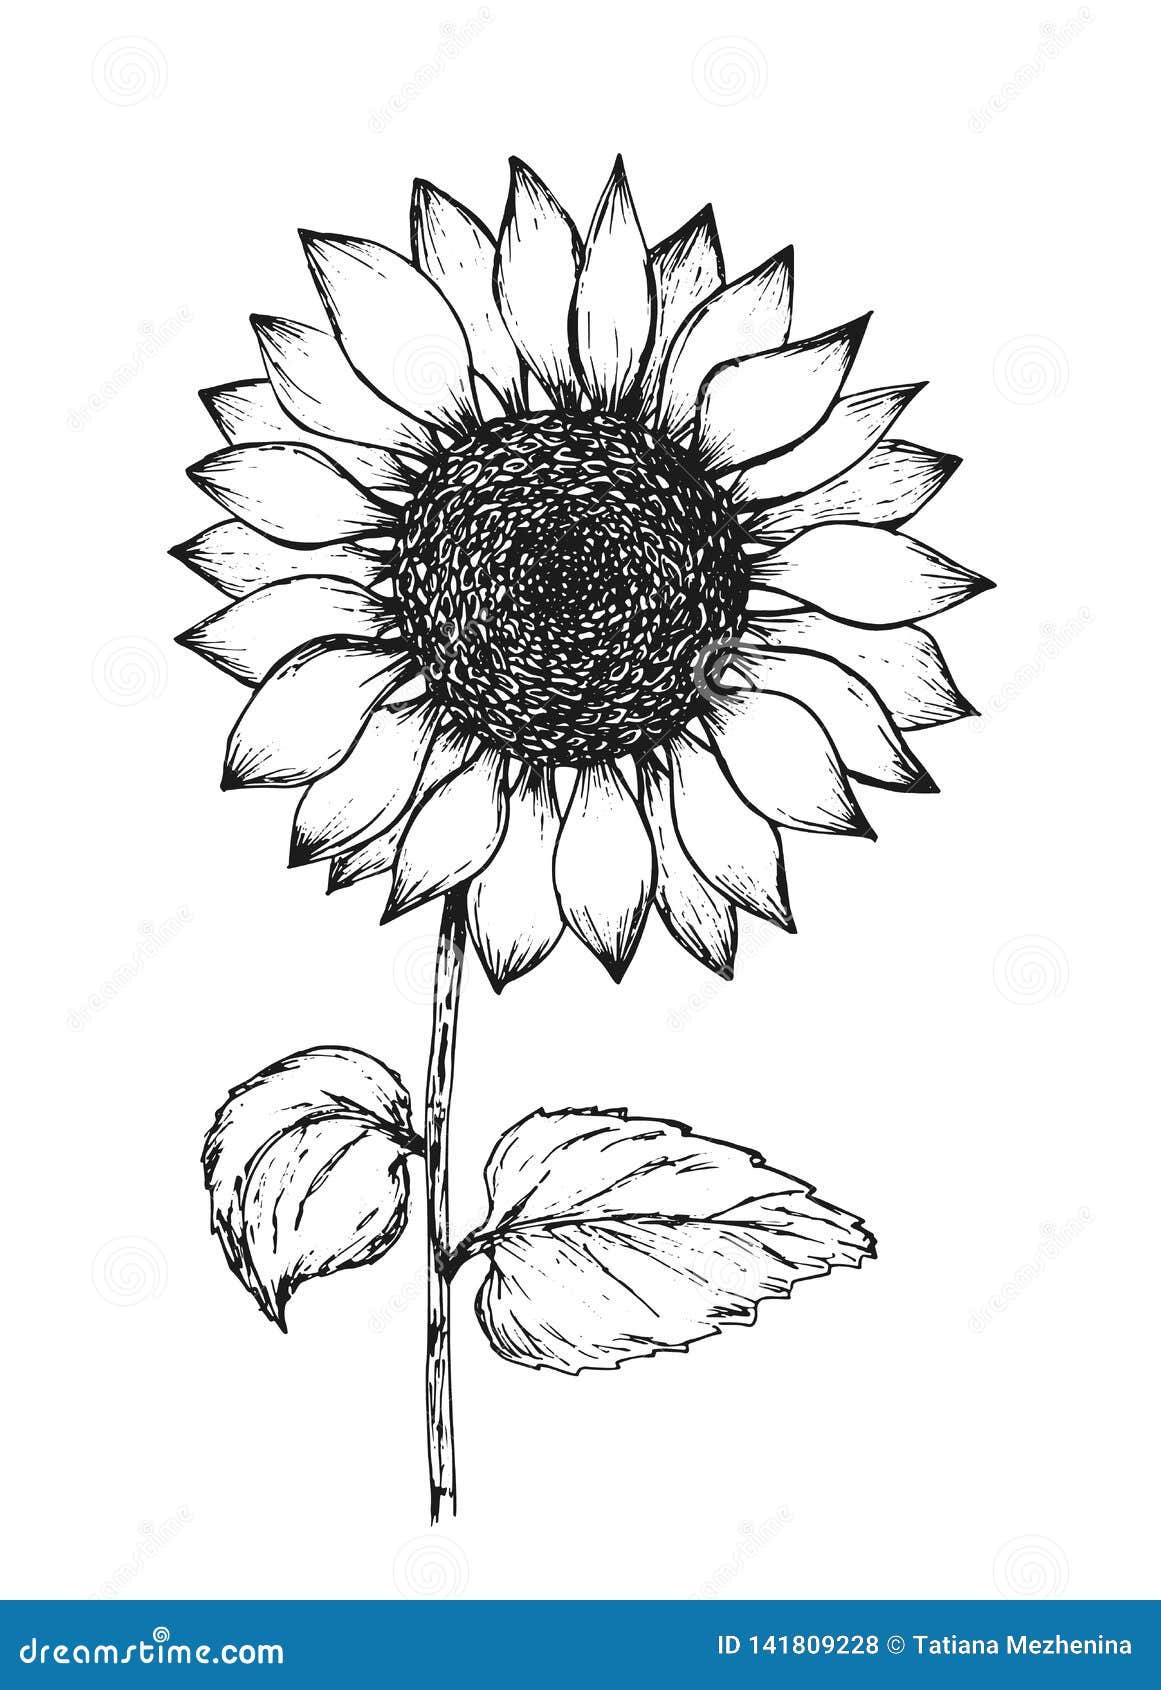 Sunflower drawing by Keiraaa1207 on DeviantArt